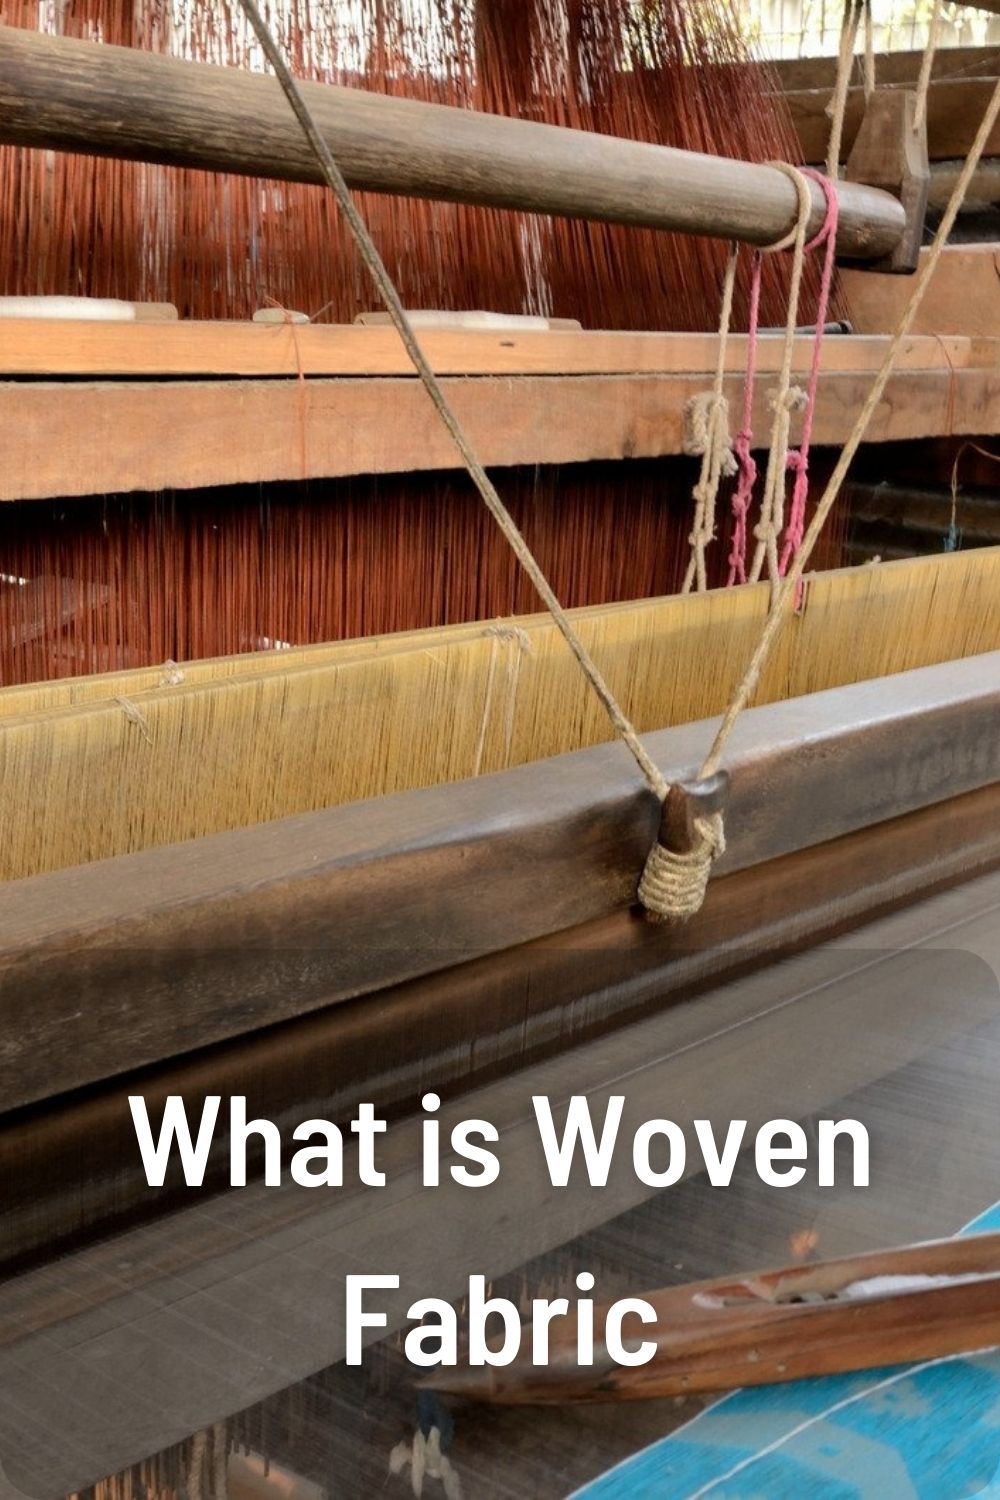 What is Woven Fabric